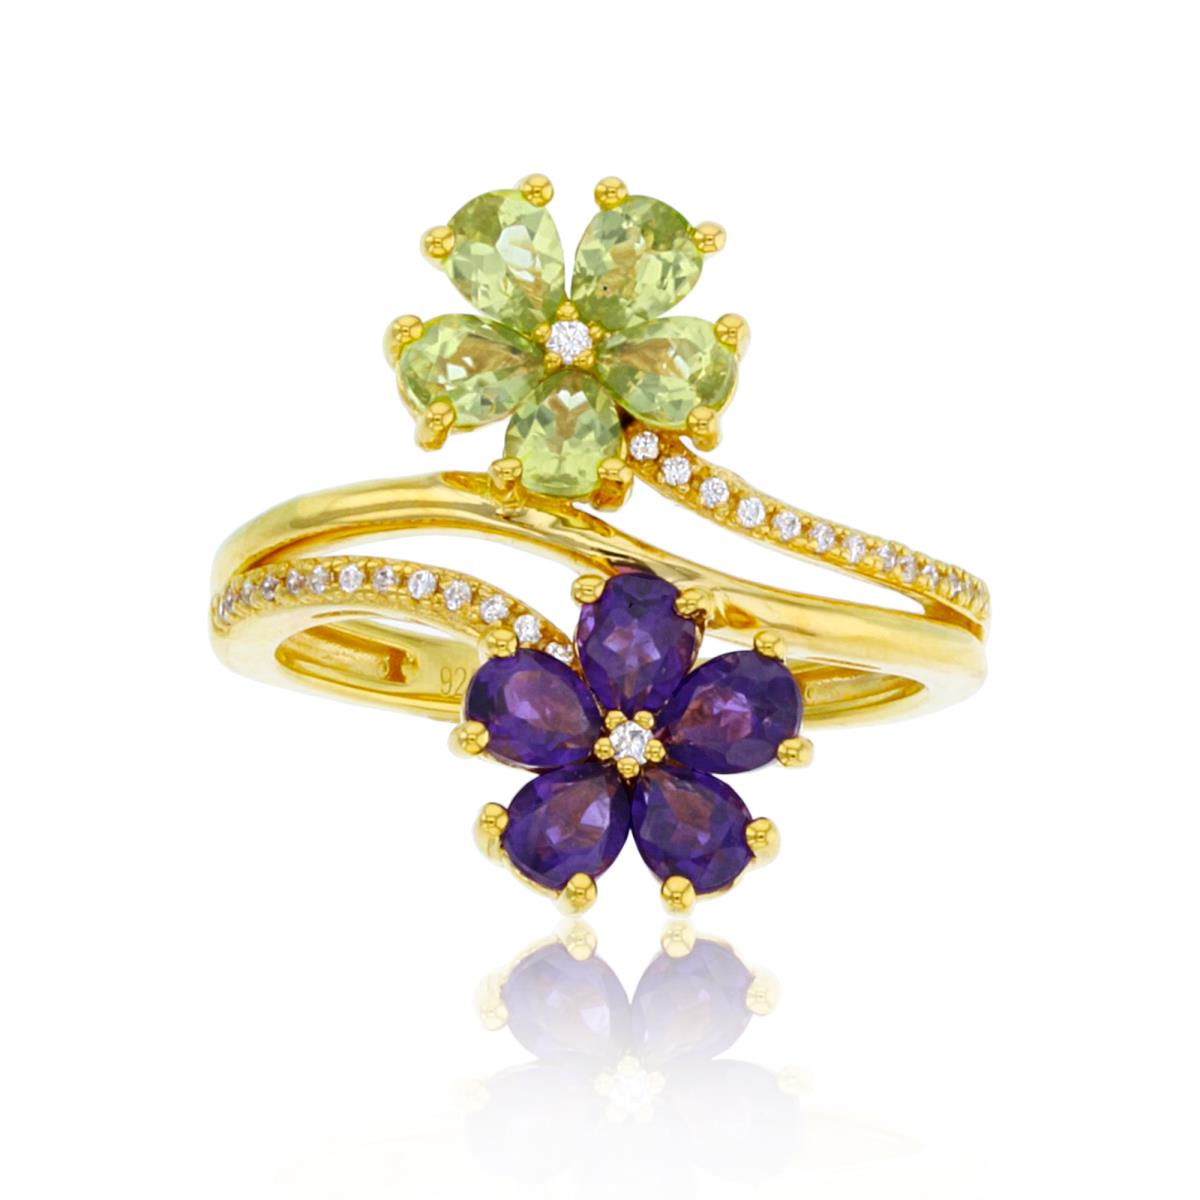 Sterling Silver+1Micron 14K Yellow Gold Rnd CZ & 4x3mm PS Amethyst/Peridot Flowers Ring